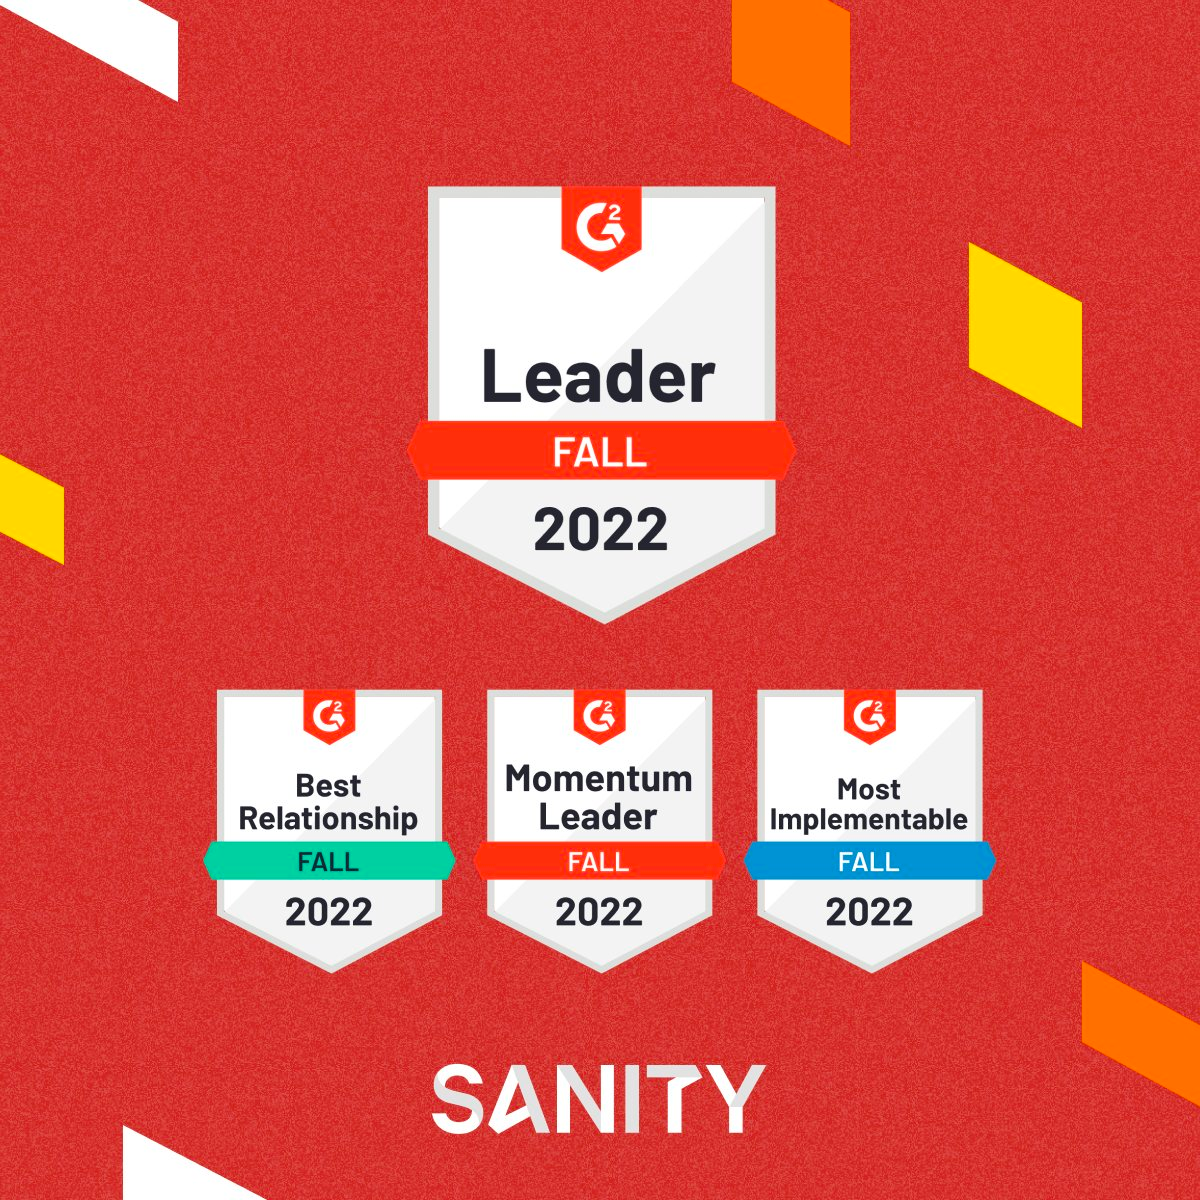 Sanity is the number 1 ranked headless CMS according to G2